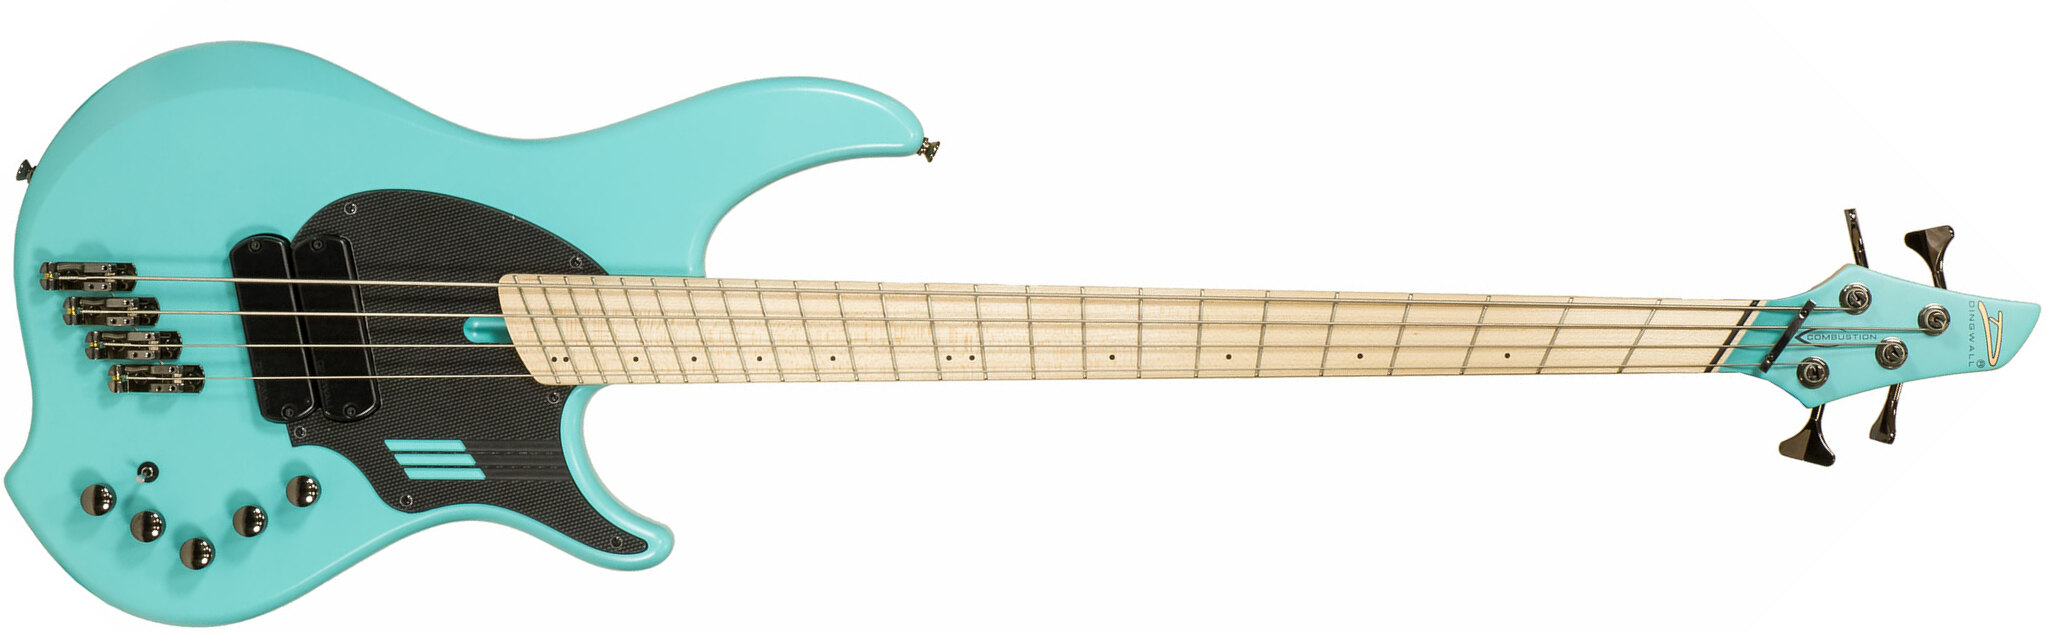 Dingwall Adam Nolly Getgood Ng2 4c Signature 2pu Active Mn - Matte Celestial Blue - Solid body electric bass - Main picture